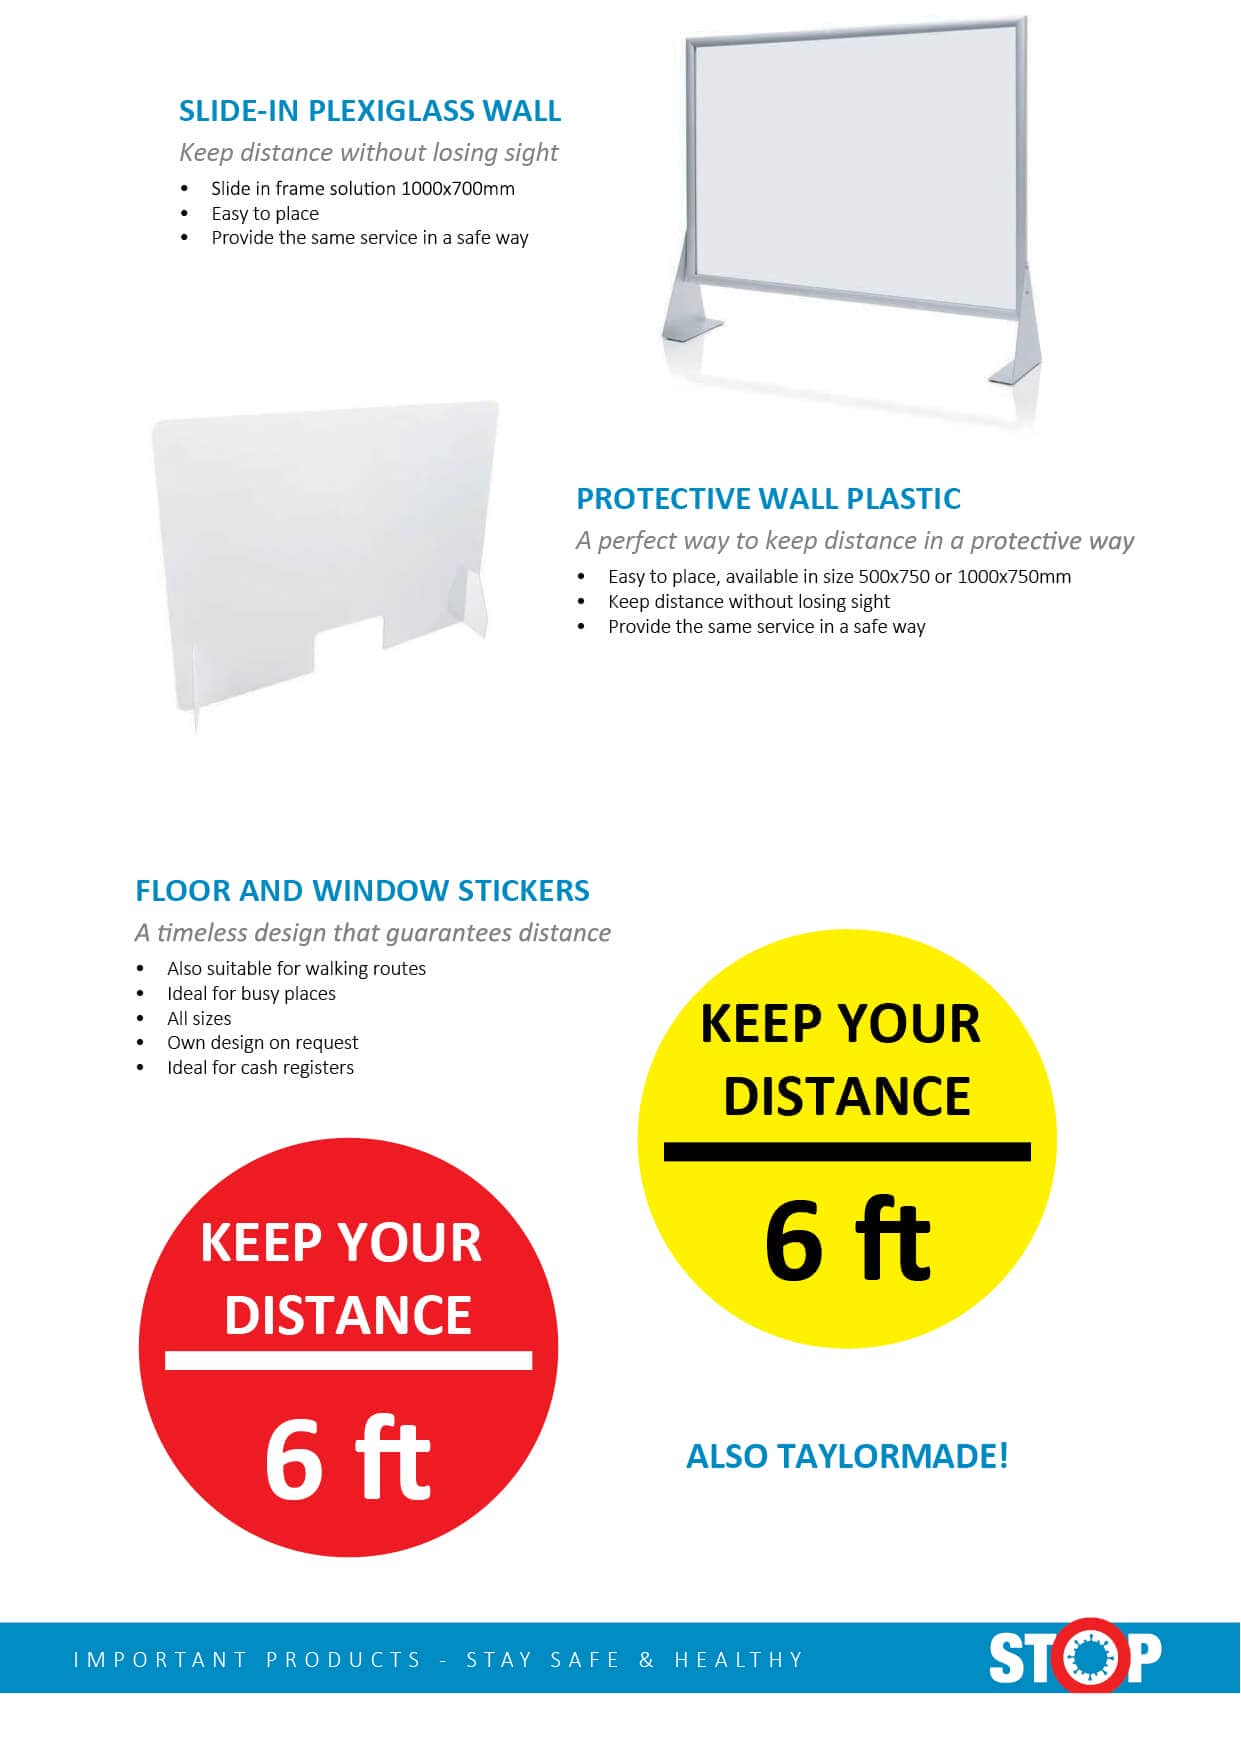 Corona proof hygiene products for workplaces producten_USA_v12